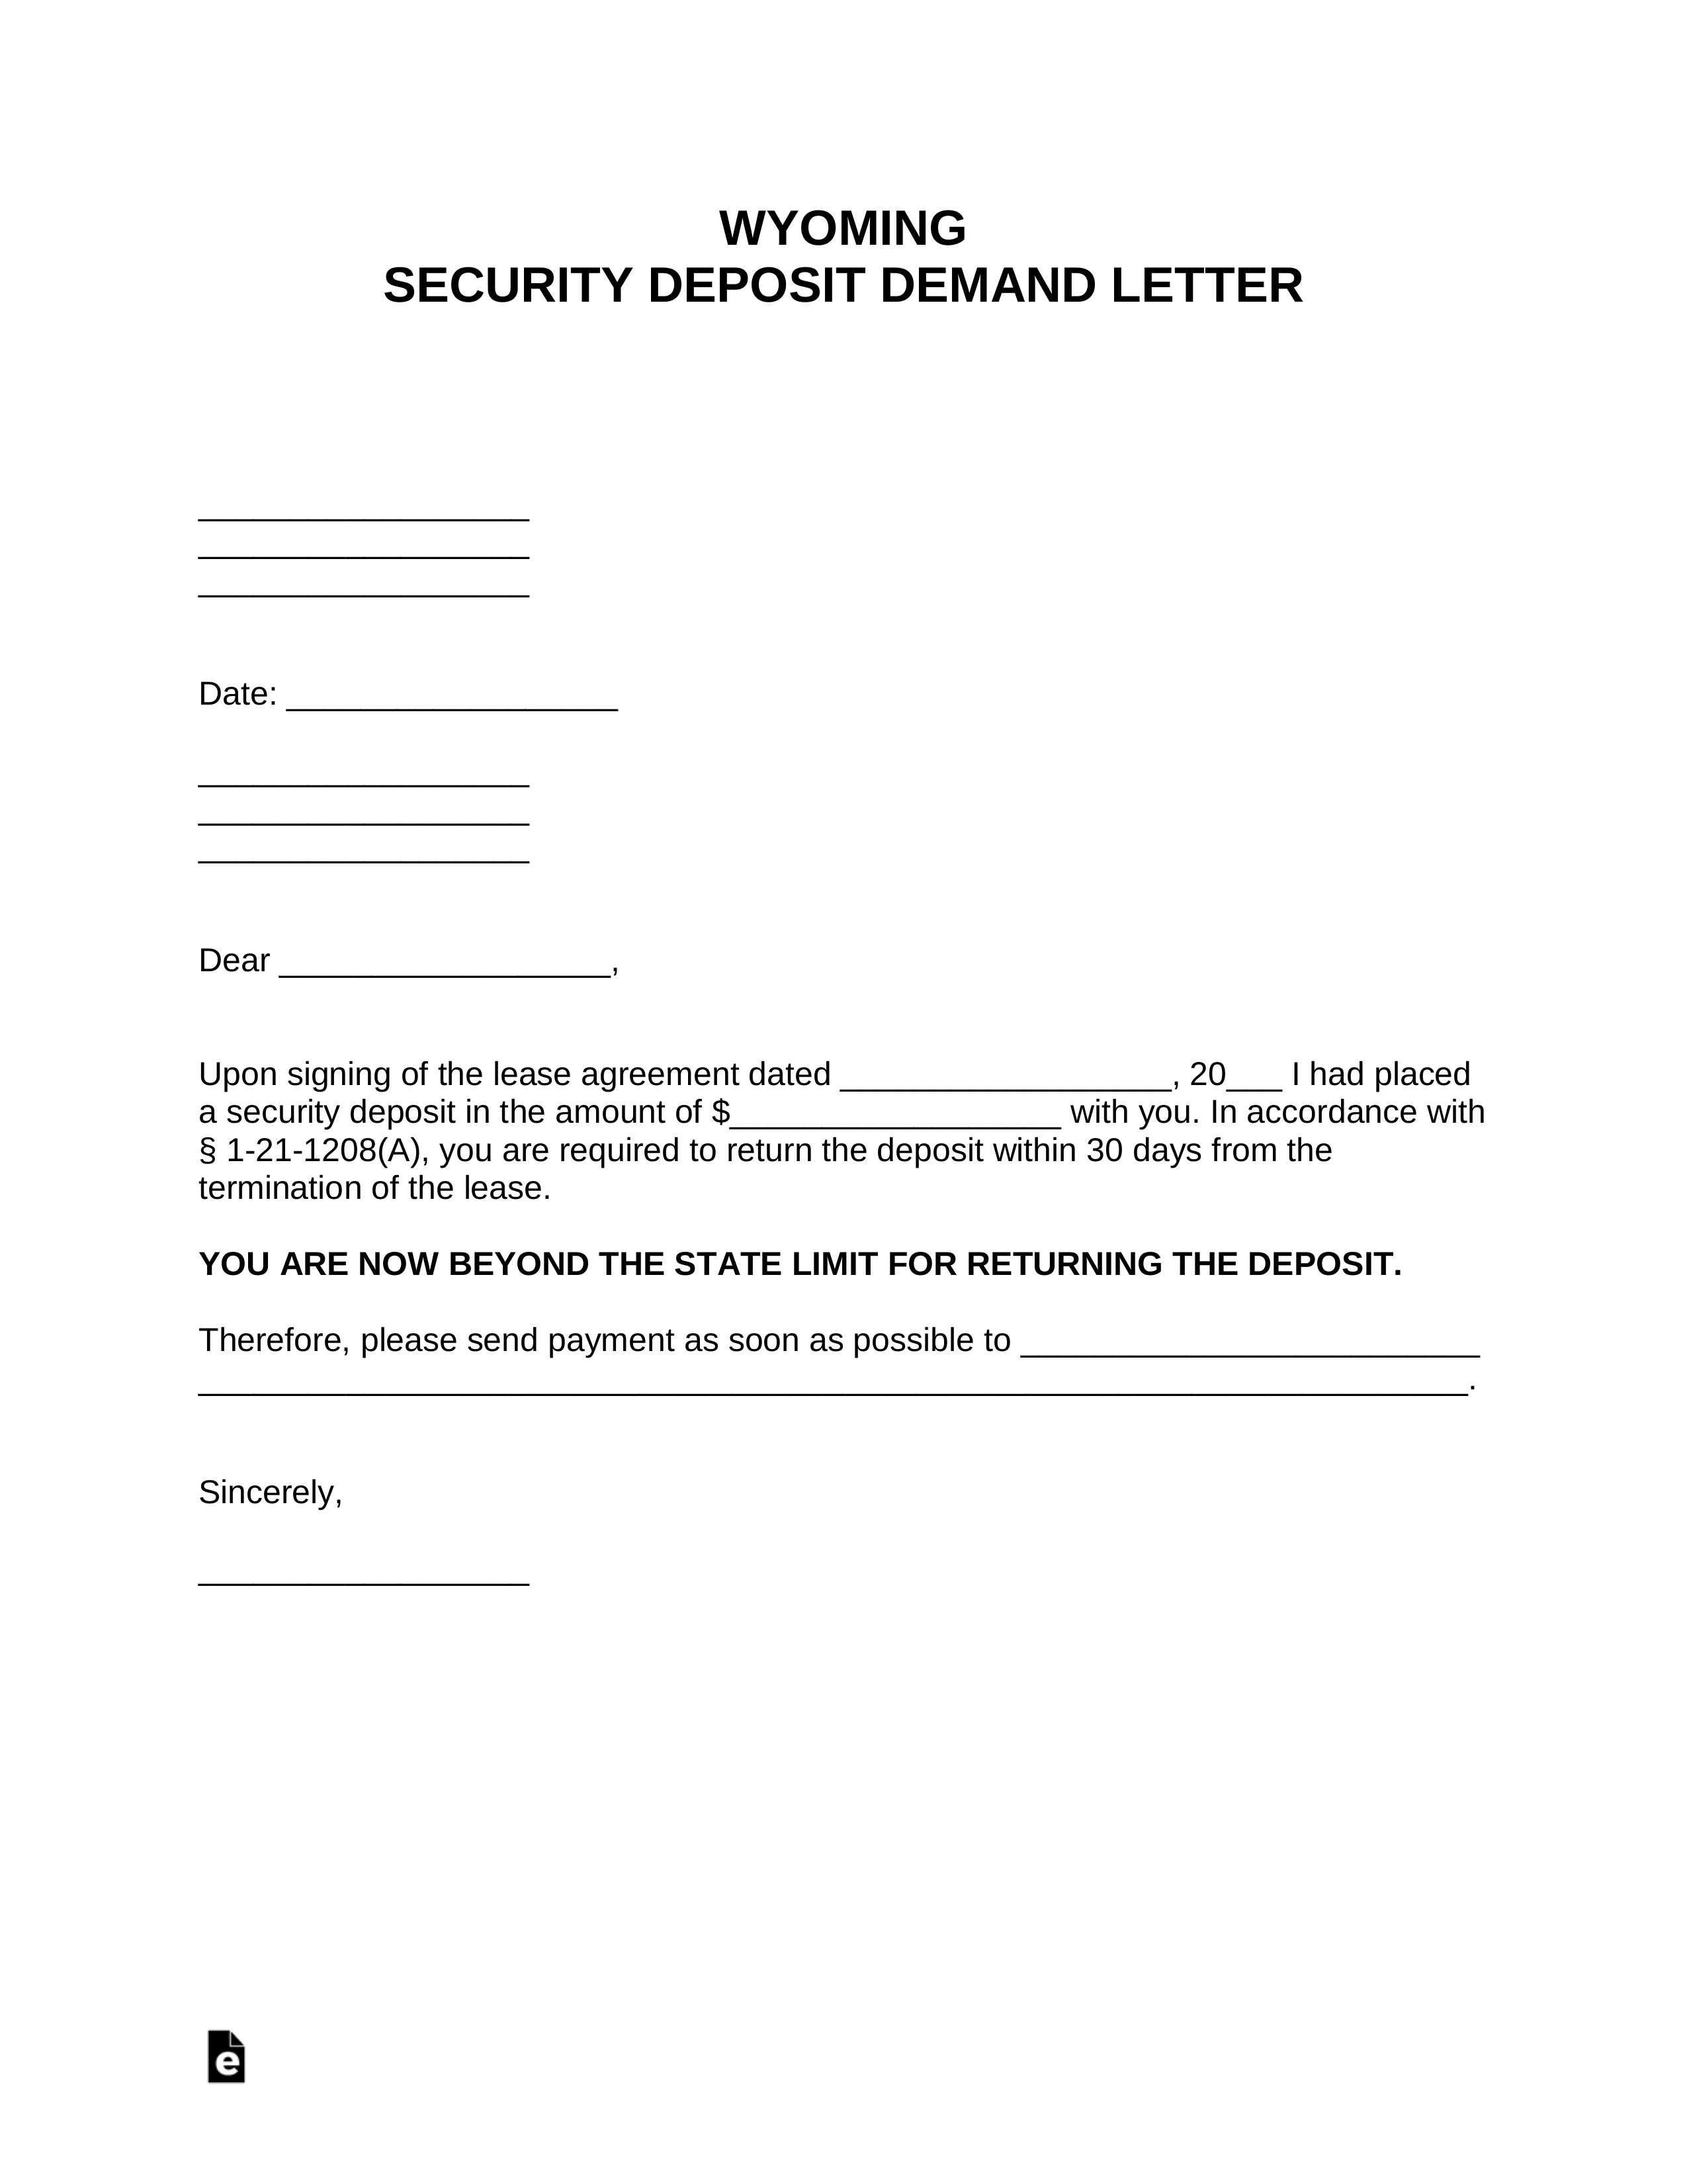 Wyoming Security Deposit Demand Letter